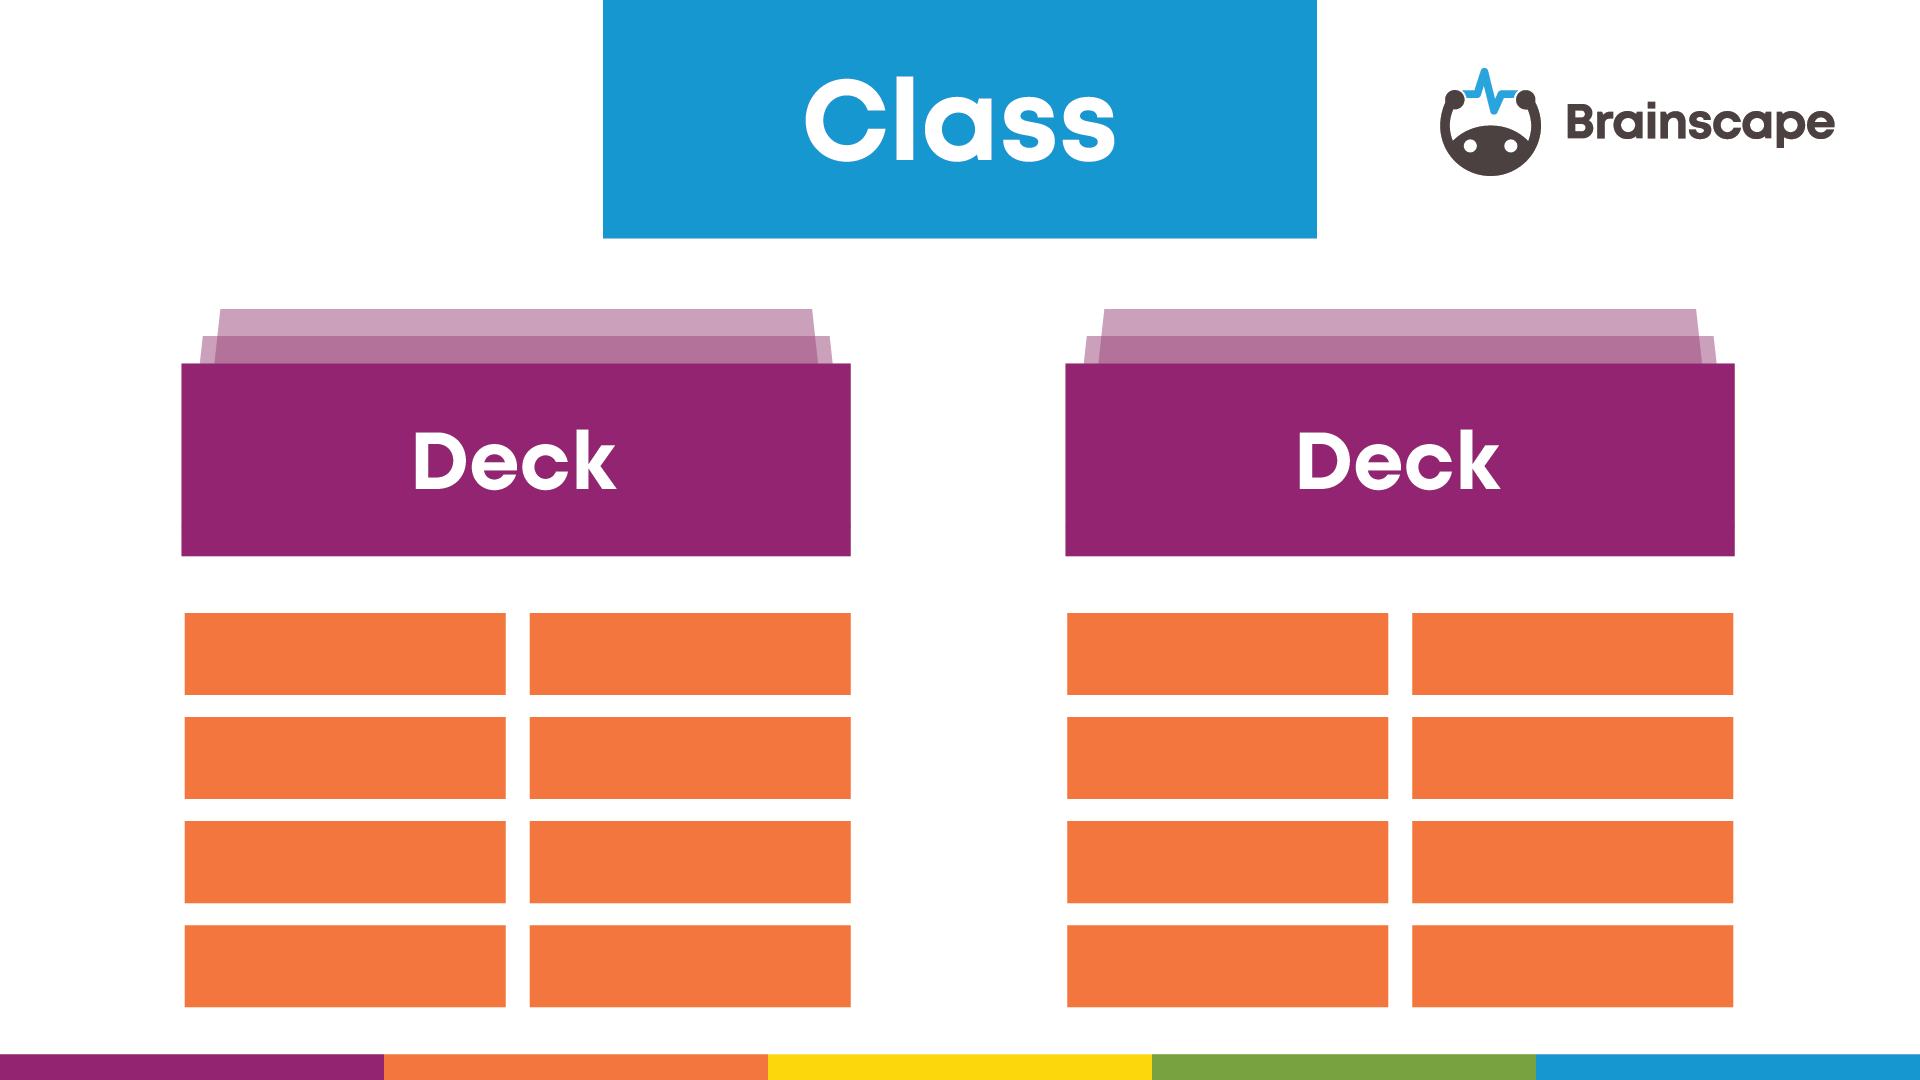 Brainscape flashcards organized into decks and classes